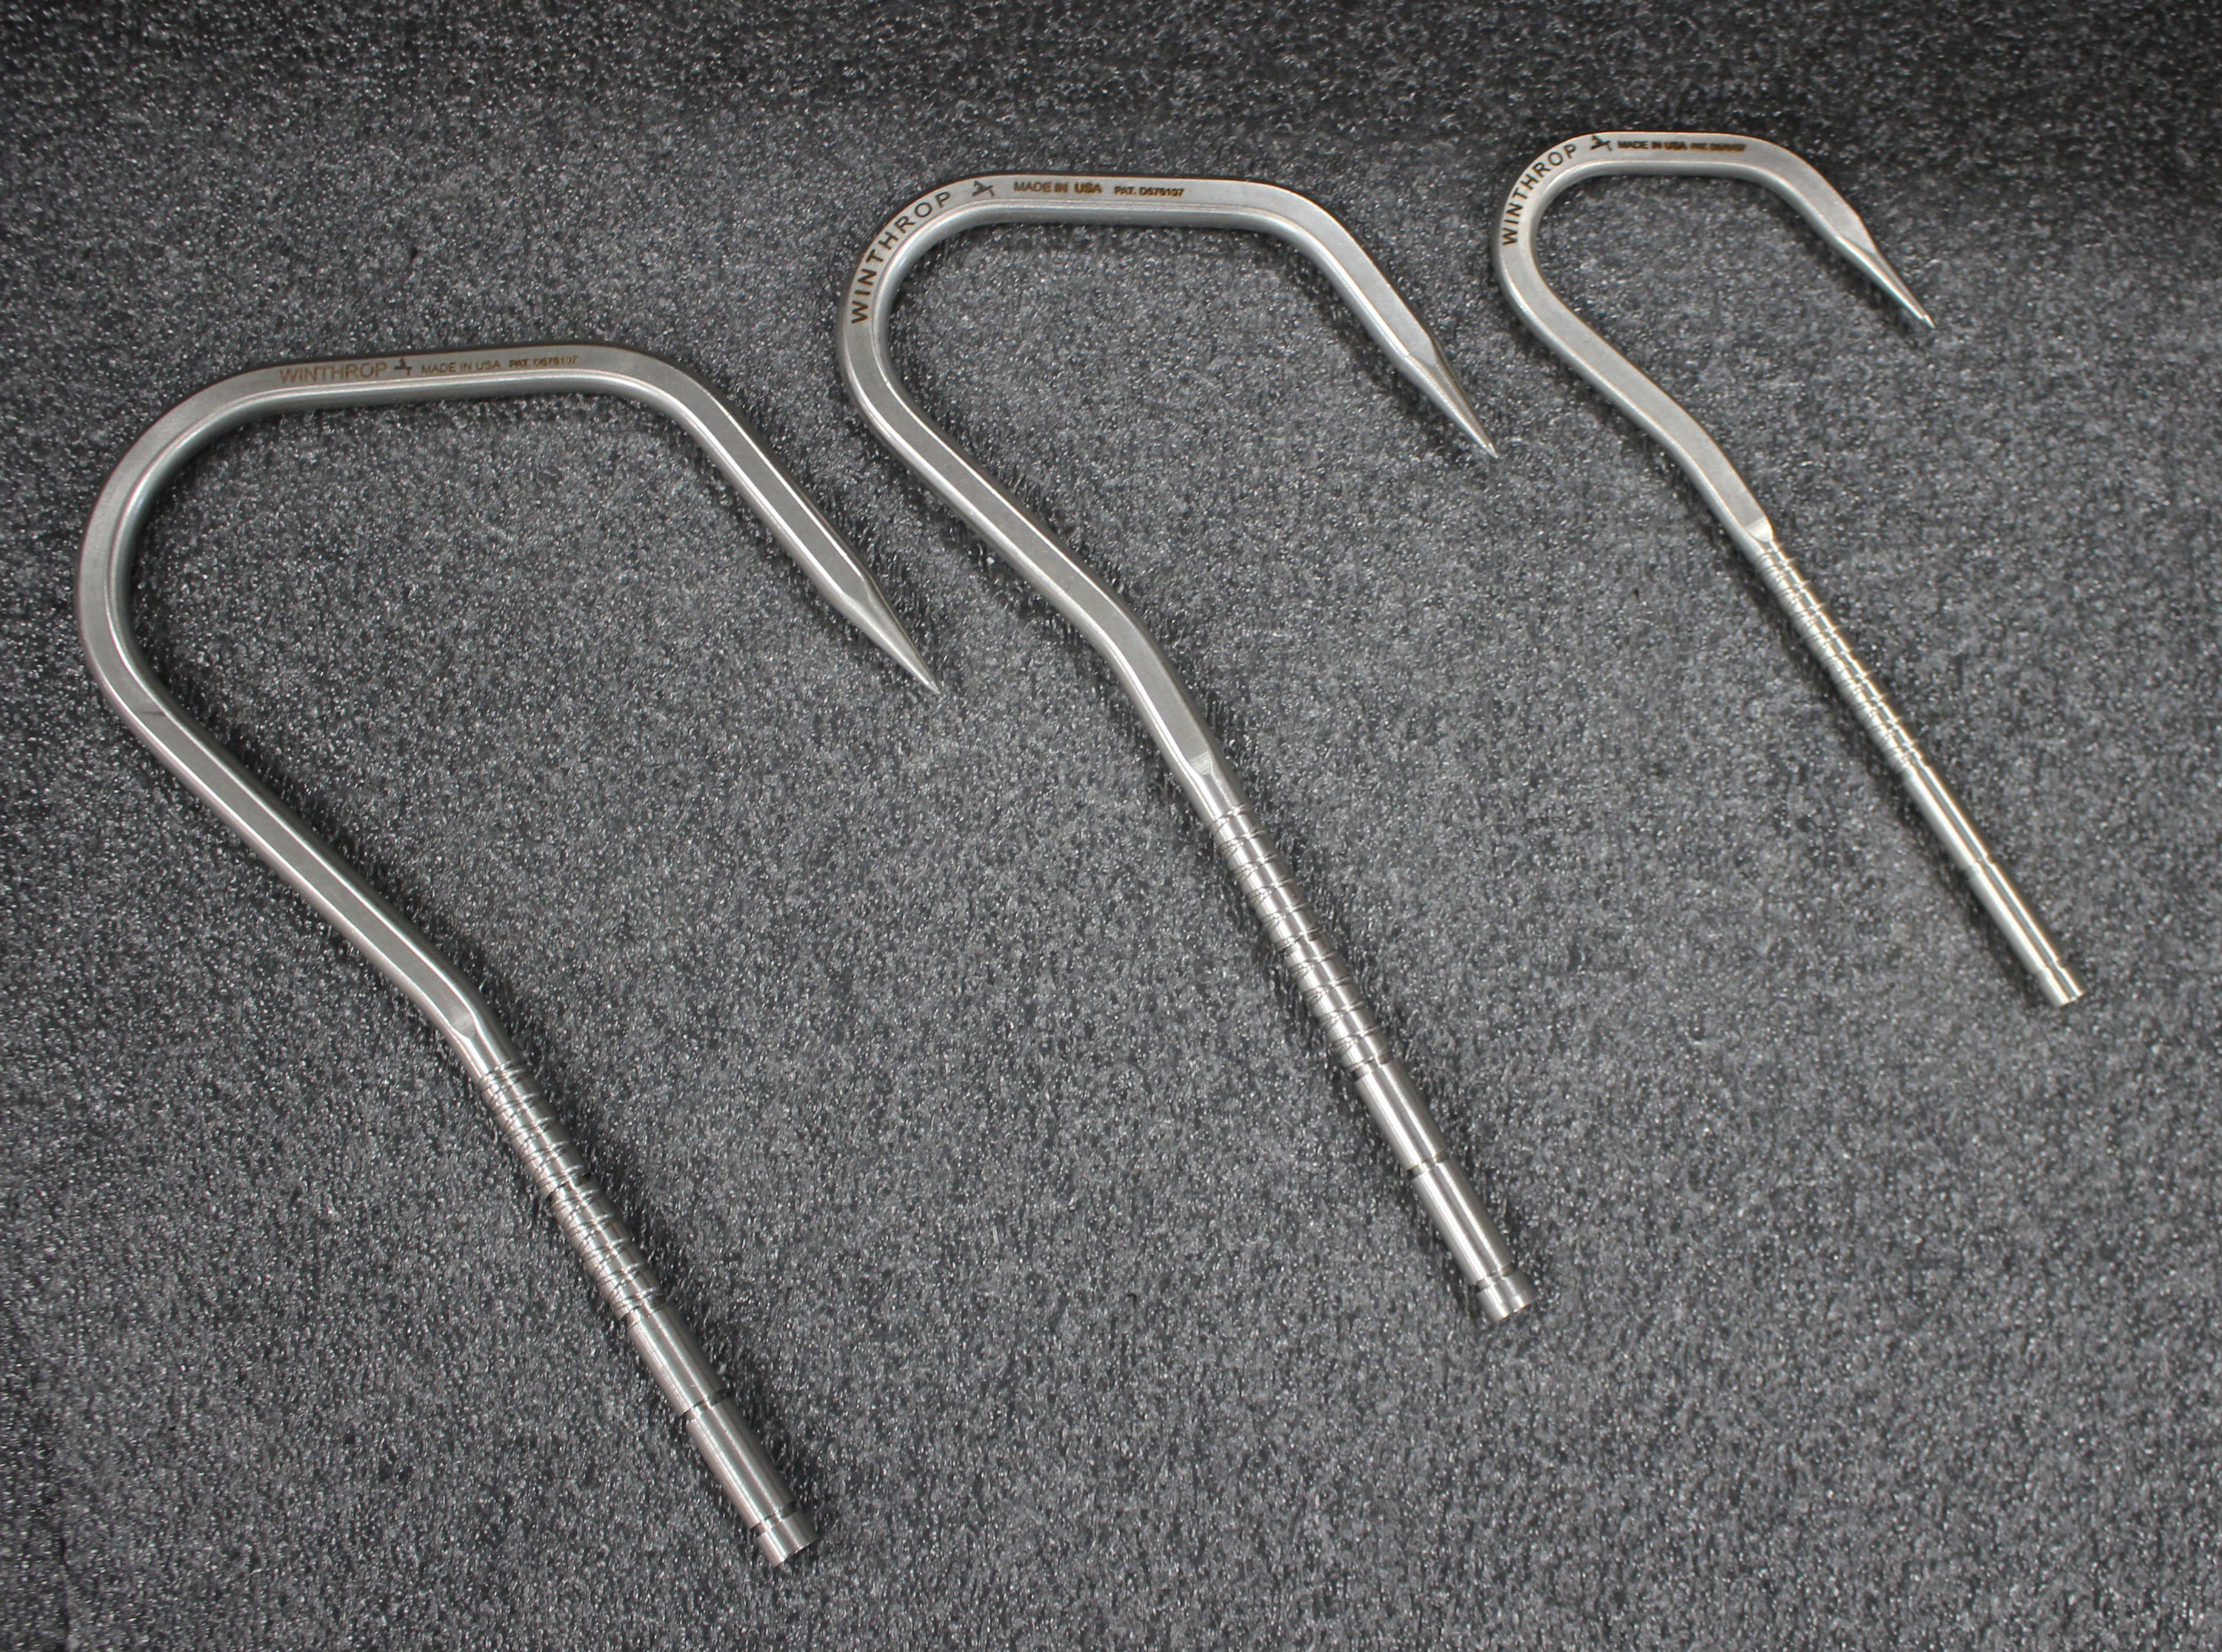 Stainless Steel Gaff Hooks